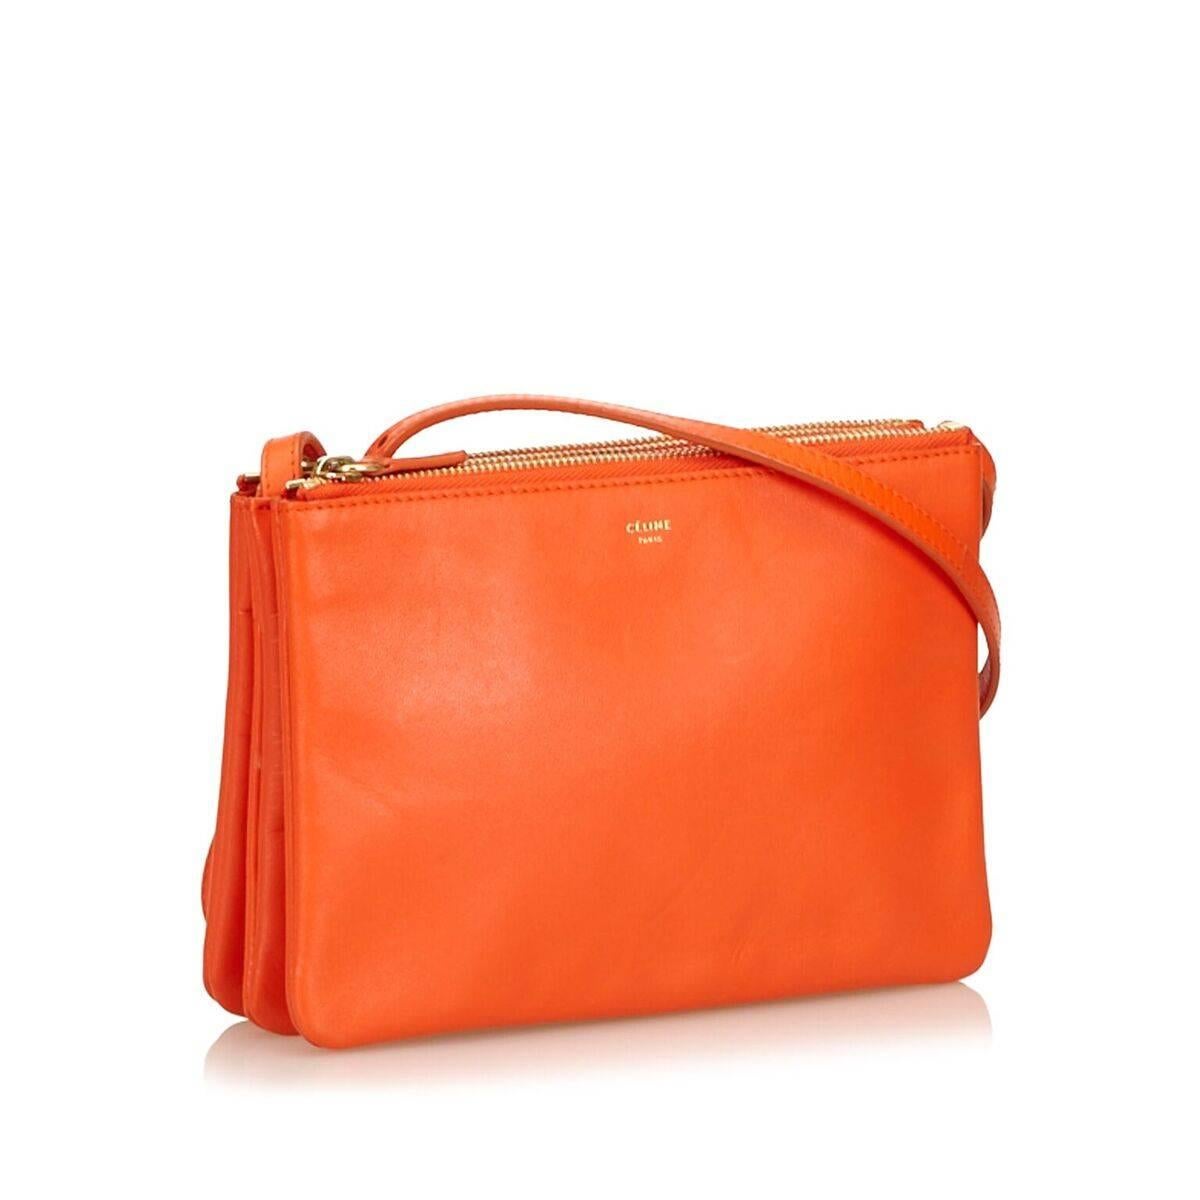 Product details:  Orange leather Trio crossbody bag by Celine.  Crossbody strap.  Triple top zip compartments.  Lined interior.  Goldtone hardware.  Dust bag included.  8